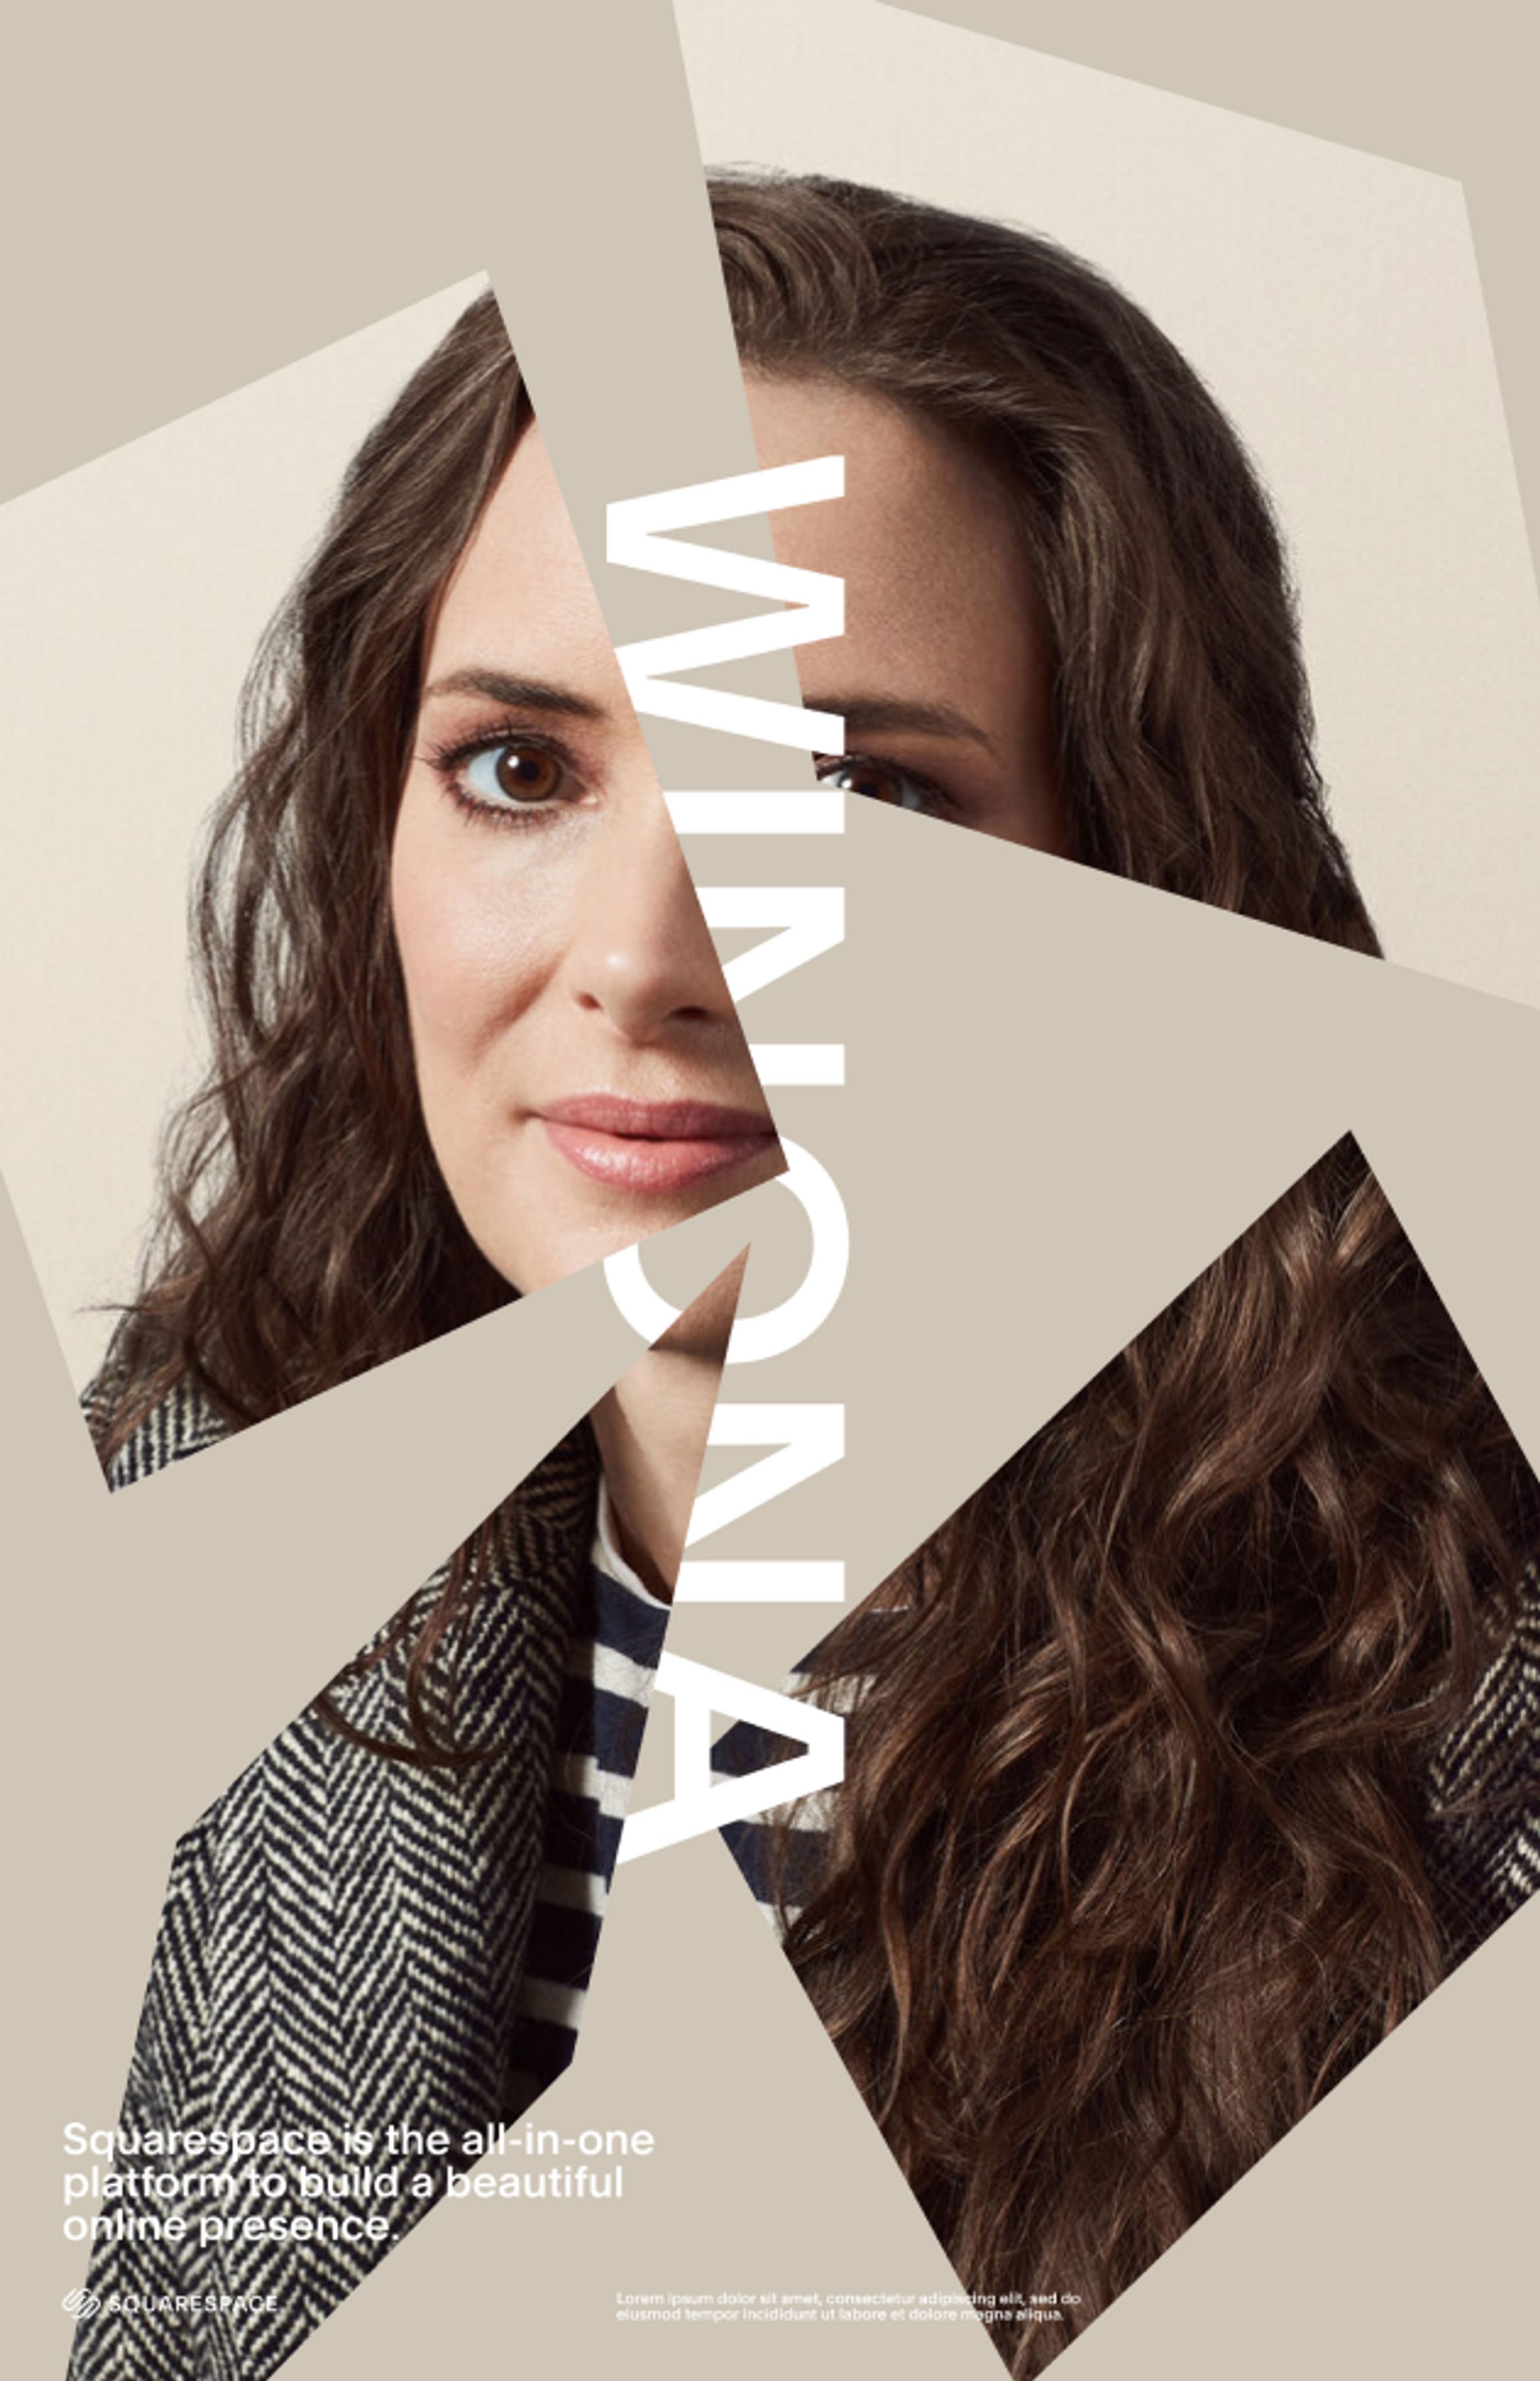 Winona Ryder in a Squarespace branded poster